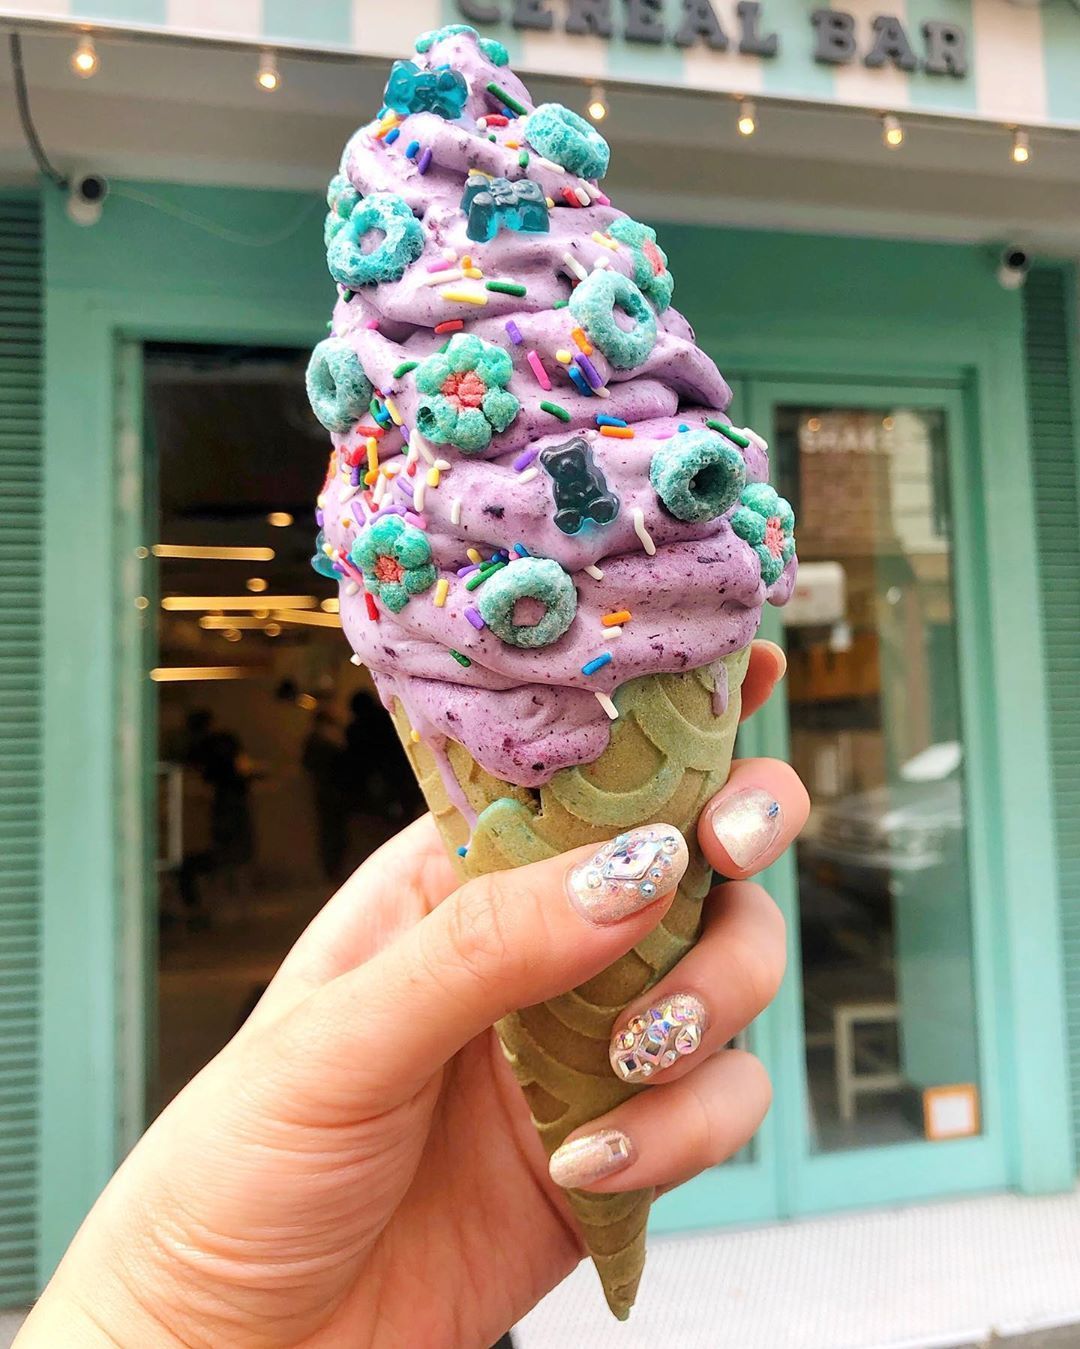 Blueberry Ice Cream on a Fruity Pebble Cone with Sprinkles, Froot